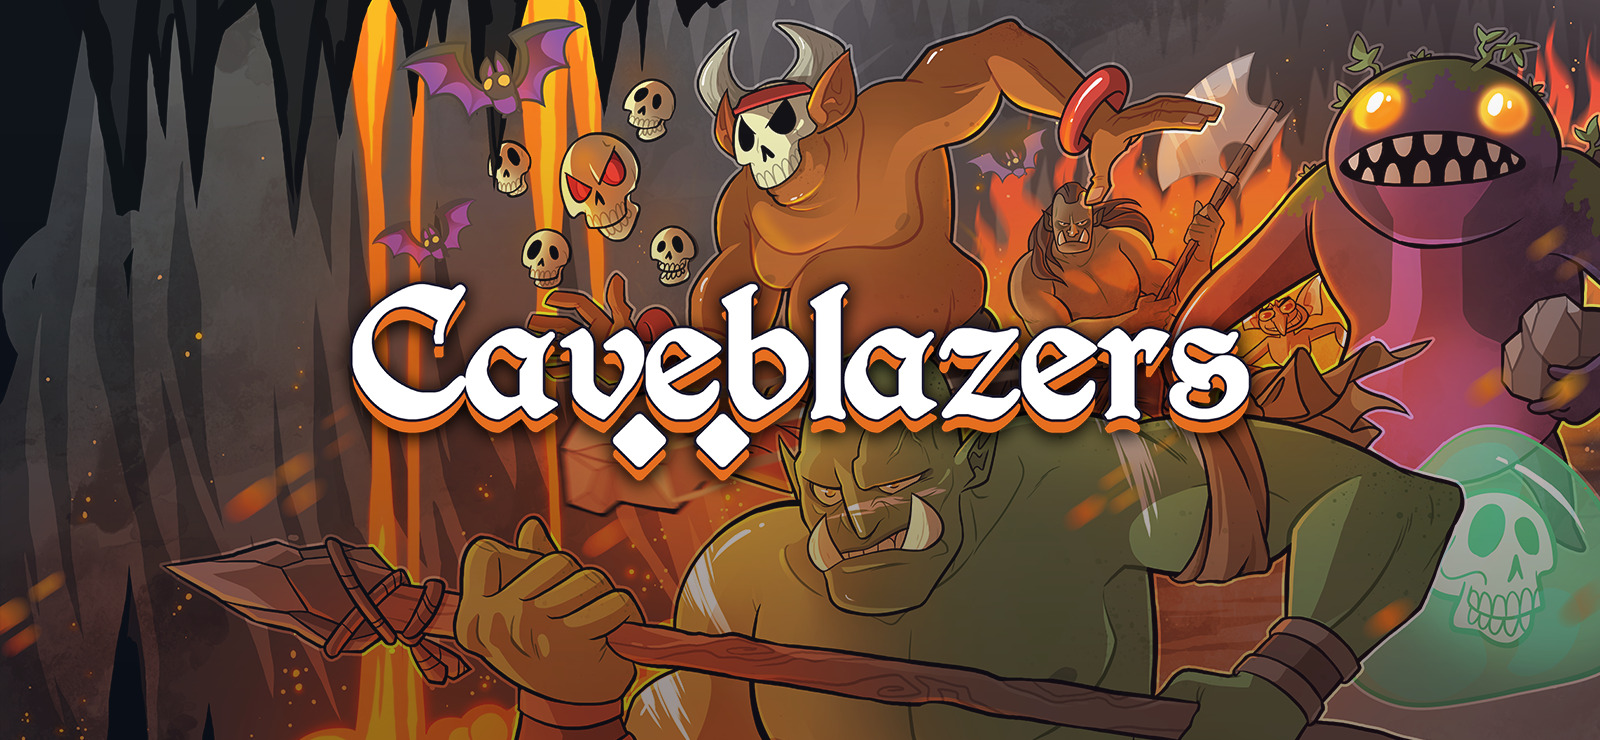 

Caveblazers is an action focused platformer roguelike set in a fantasy world. Each game